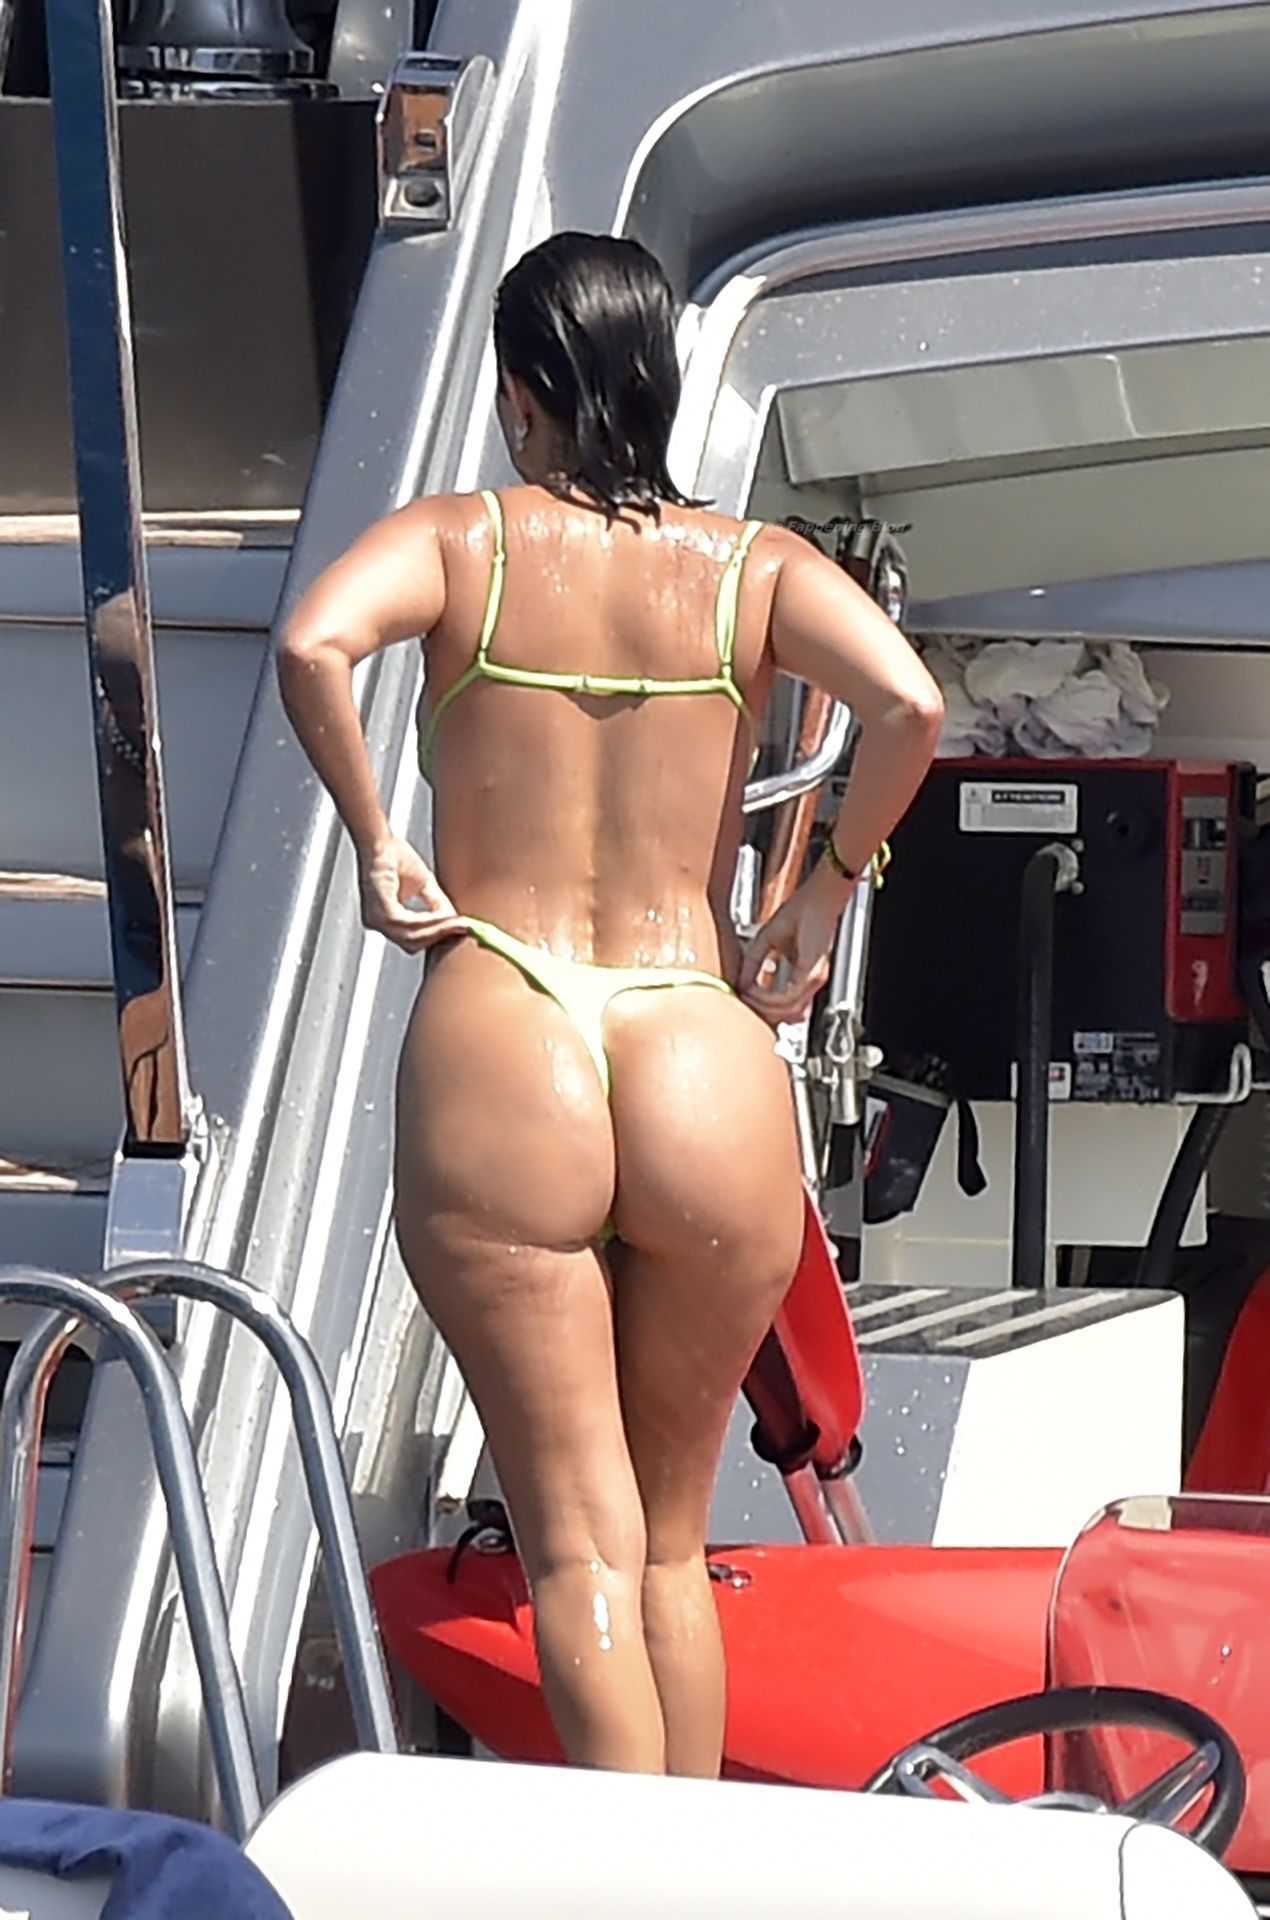 Epic Ass Alert Kourtney Kardashian Showing Her Backside in a Sexy Gallery  hq nude pic